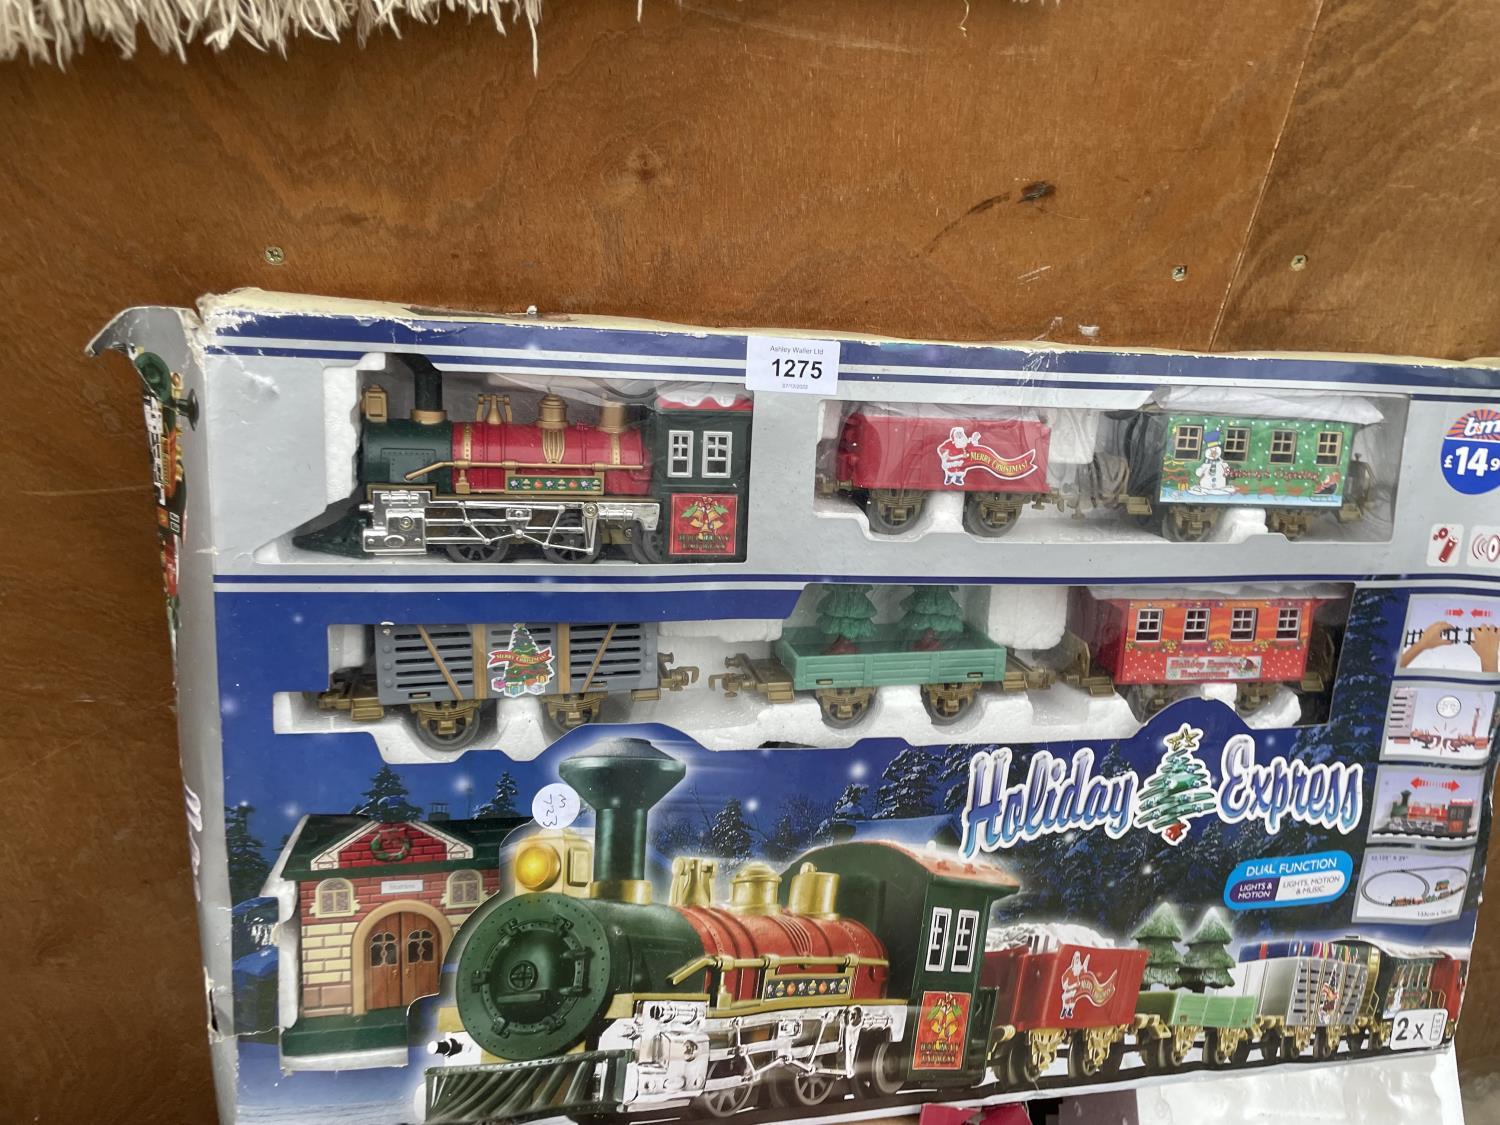 A LARGE ASSORTMENT OF CHRISTMAS DECORATIONS TO INCLUDE A LIGHT UP TRAIN, A HOLIDAY EXPRESS TRAIN - Image 2 of 4